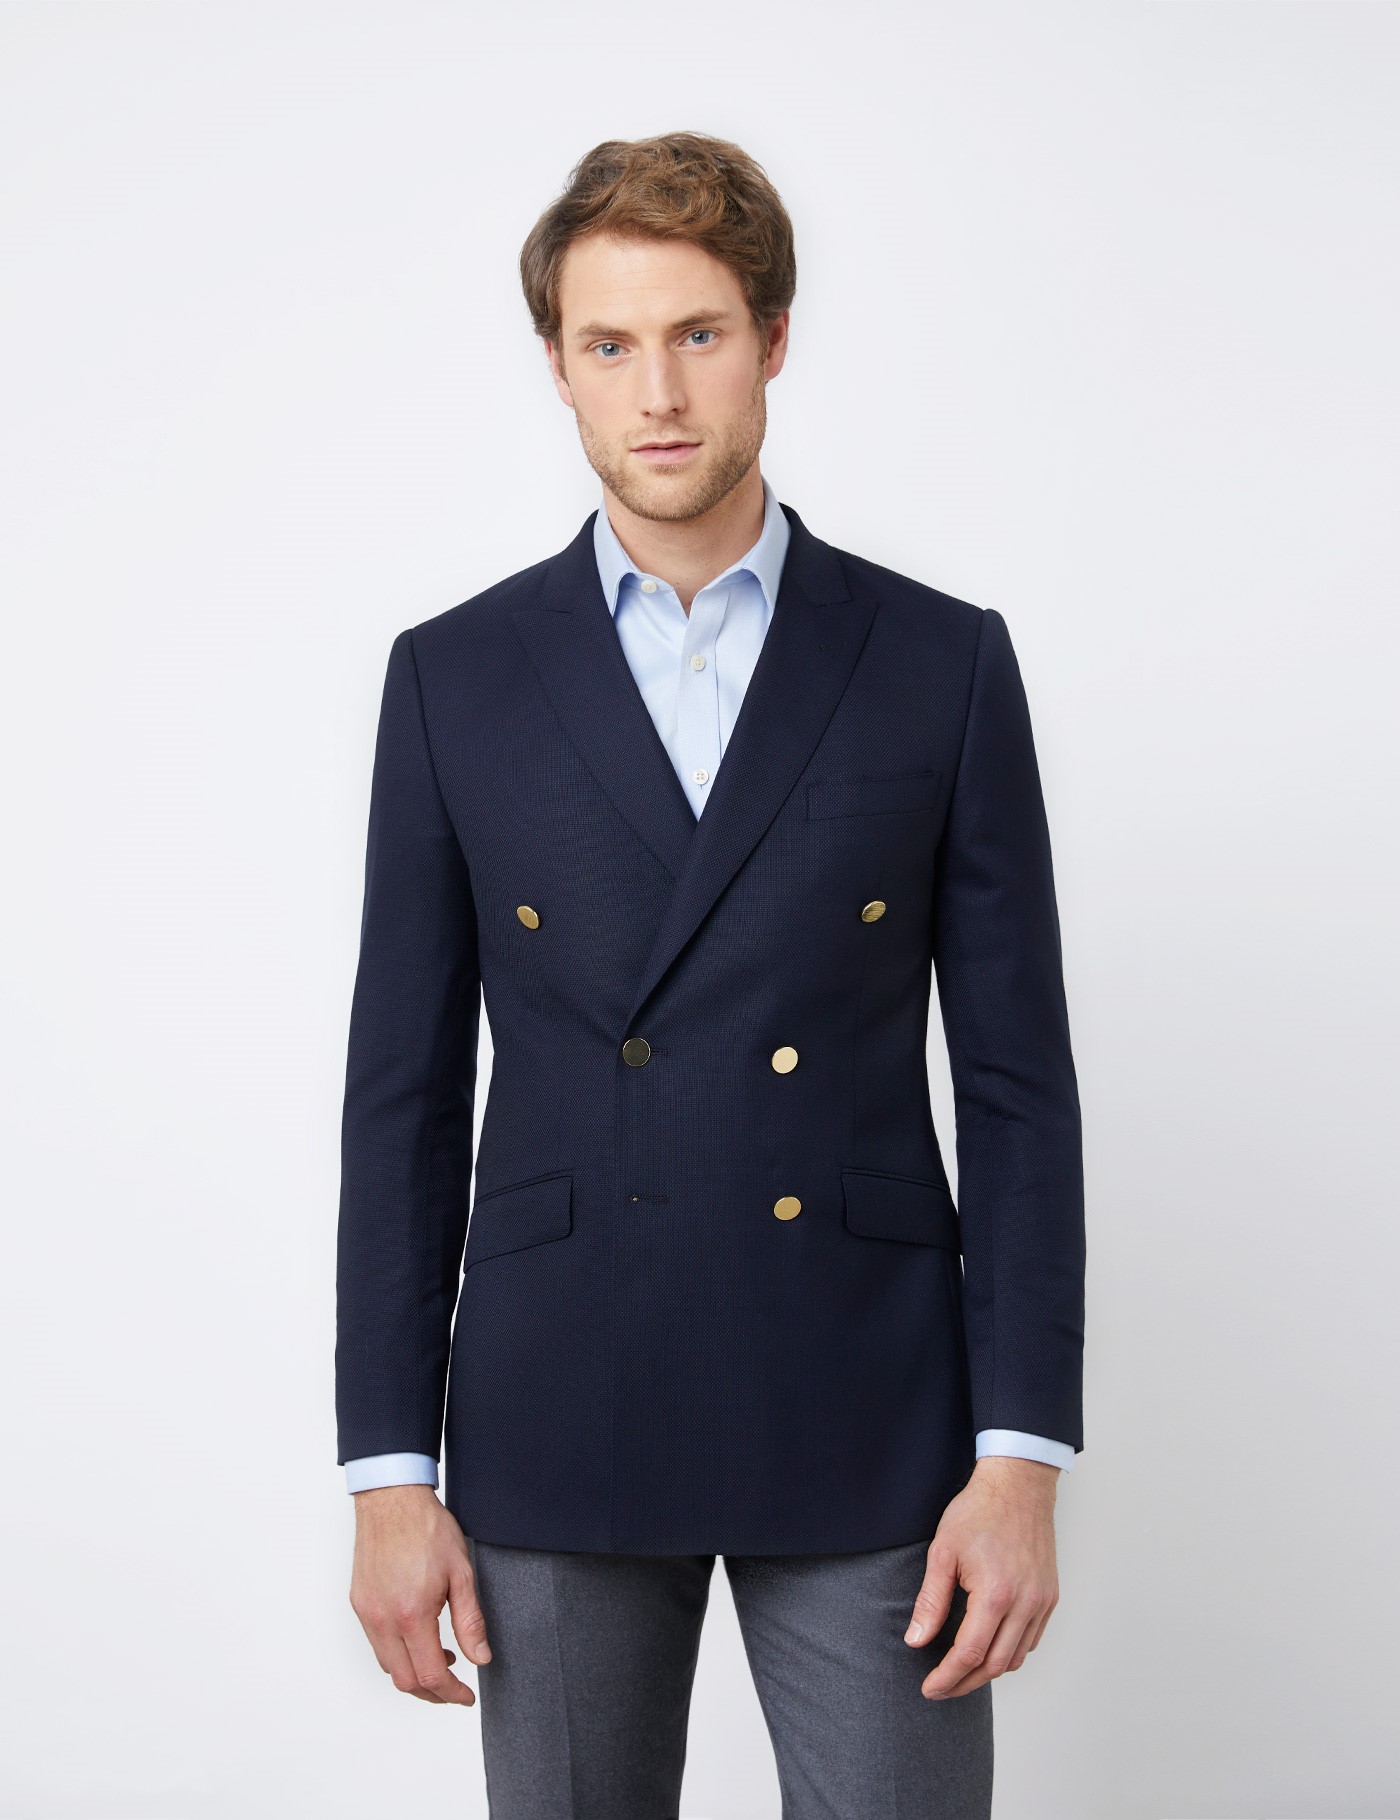 100% Wool Men’s Double Breasted Blazer with Double Back Vent in Navy